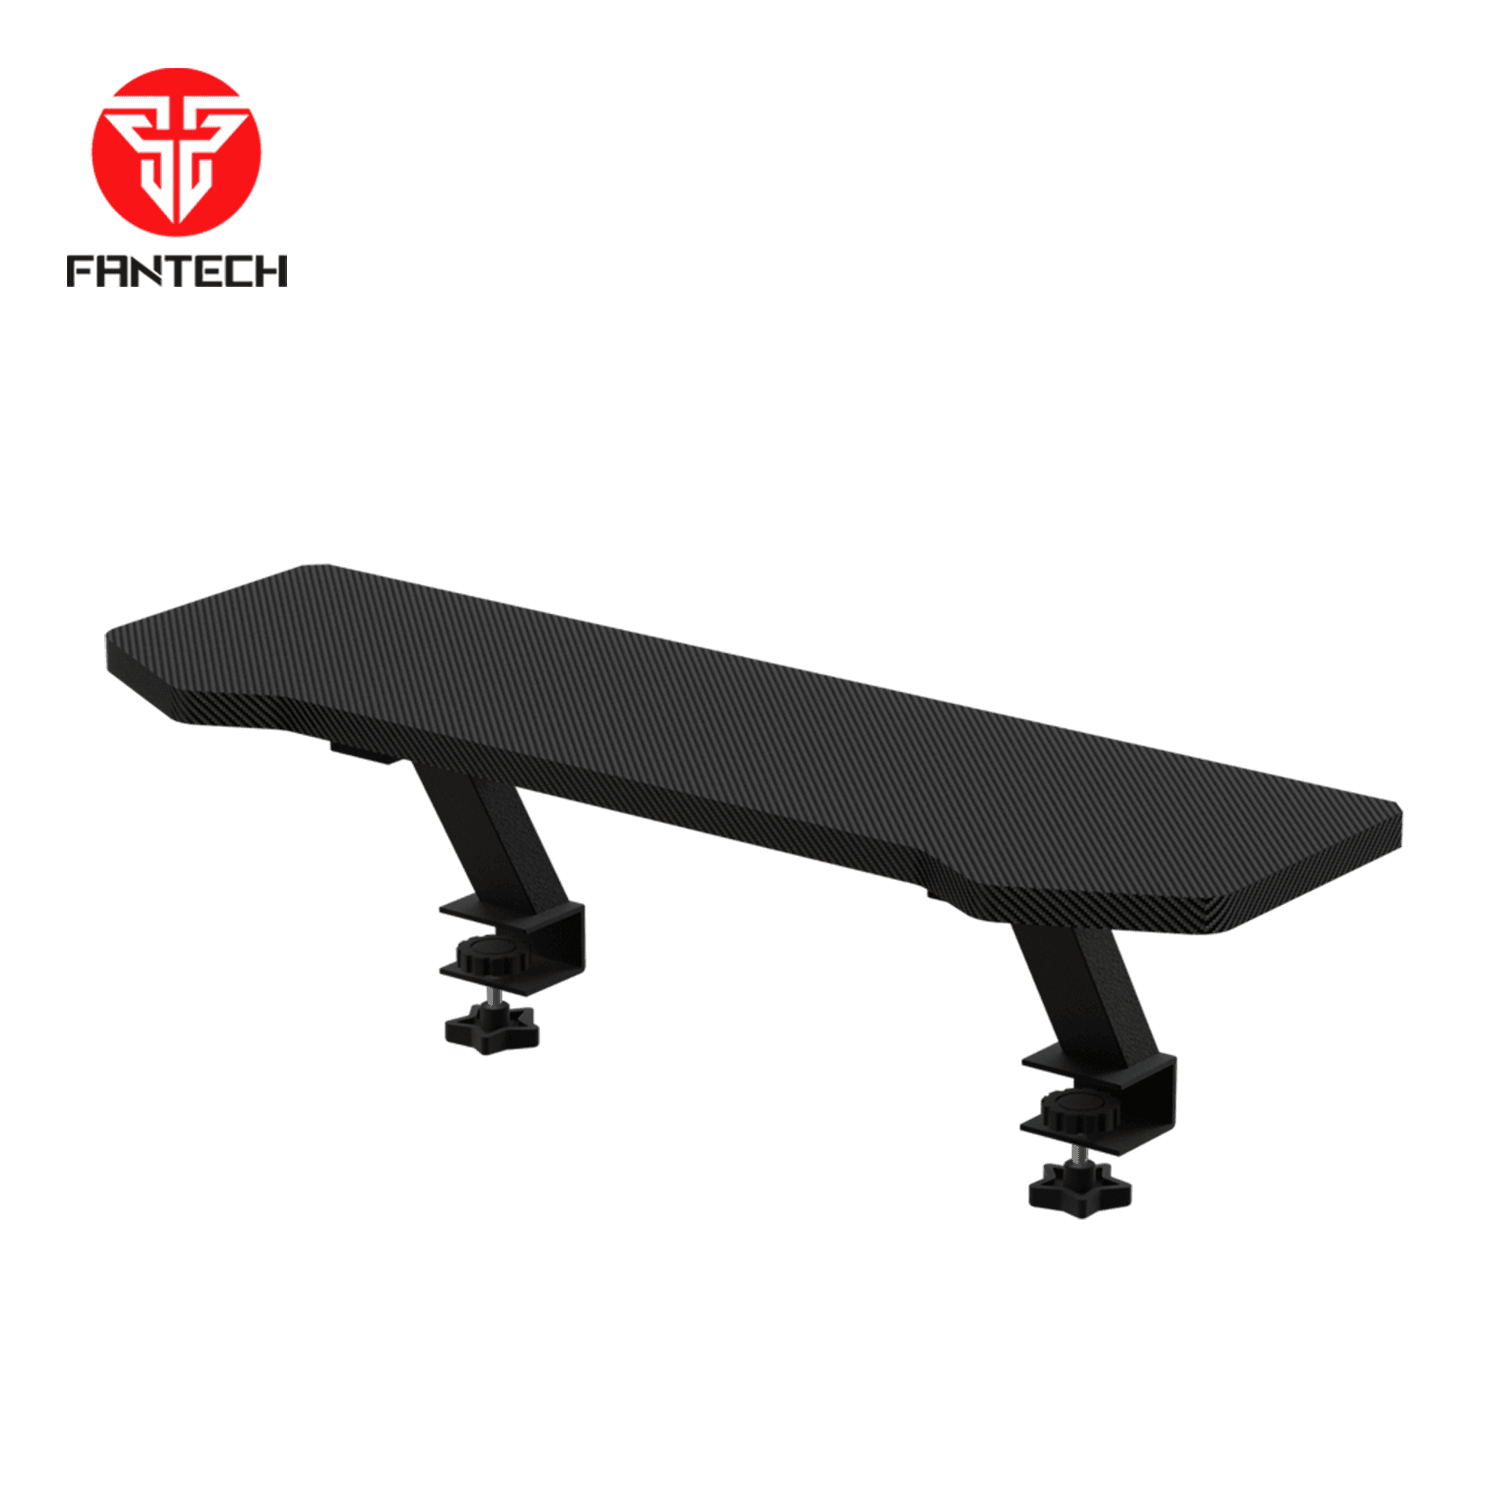 Fantech ACGD171 Monitor Stand Premium Material and Maximized Desk Space JOD 19